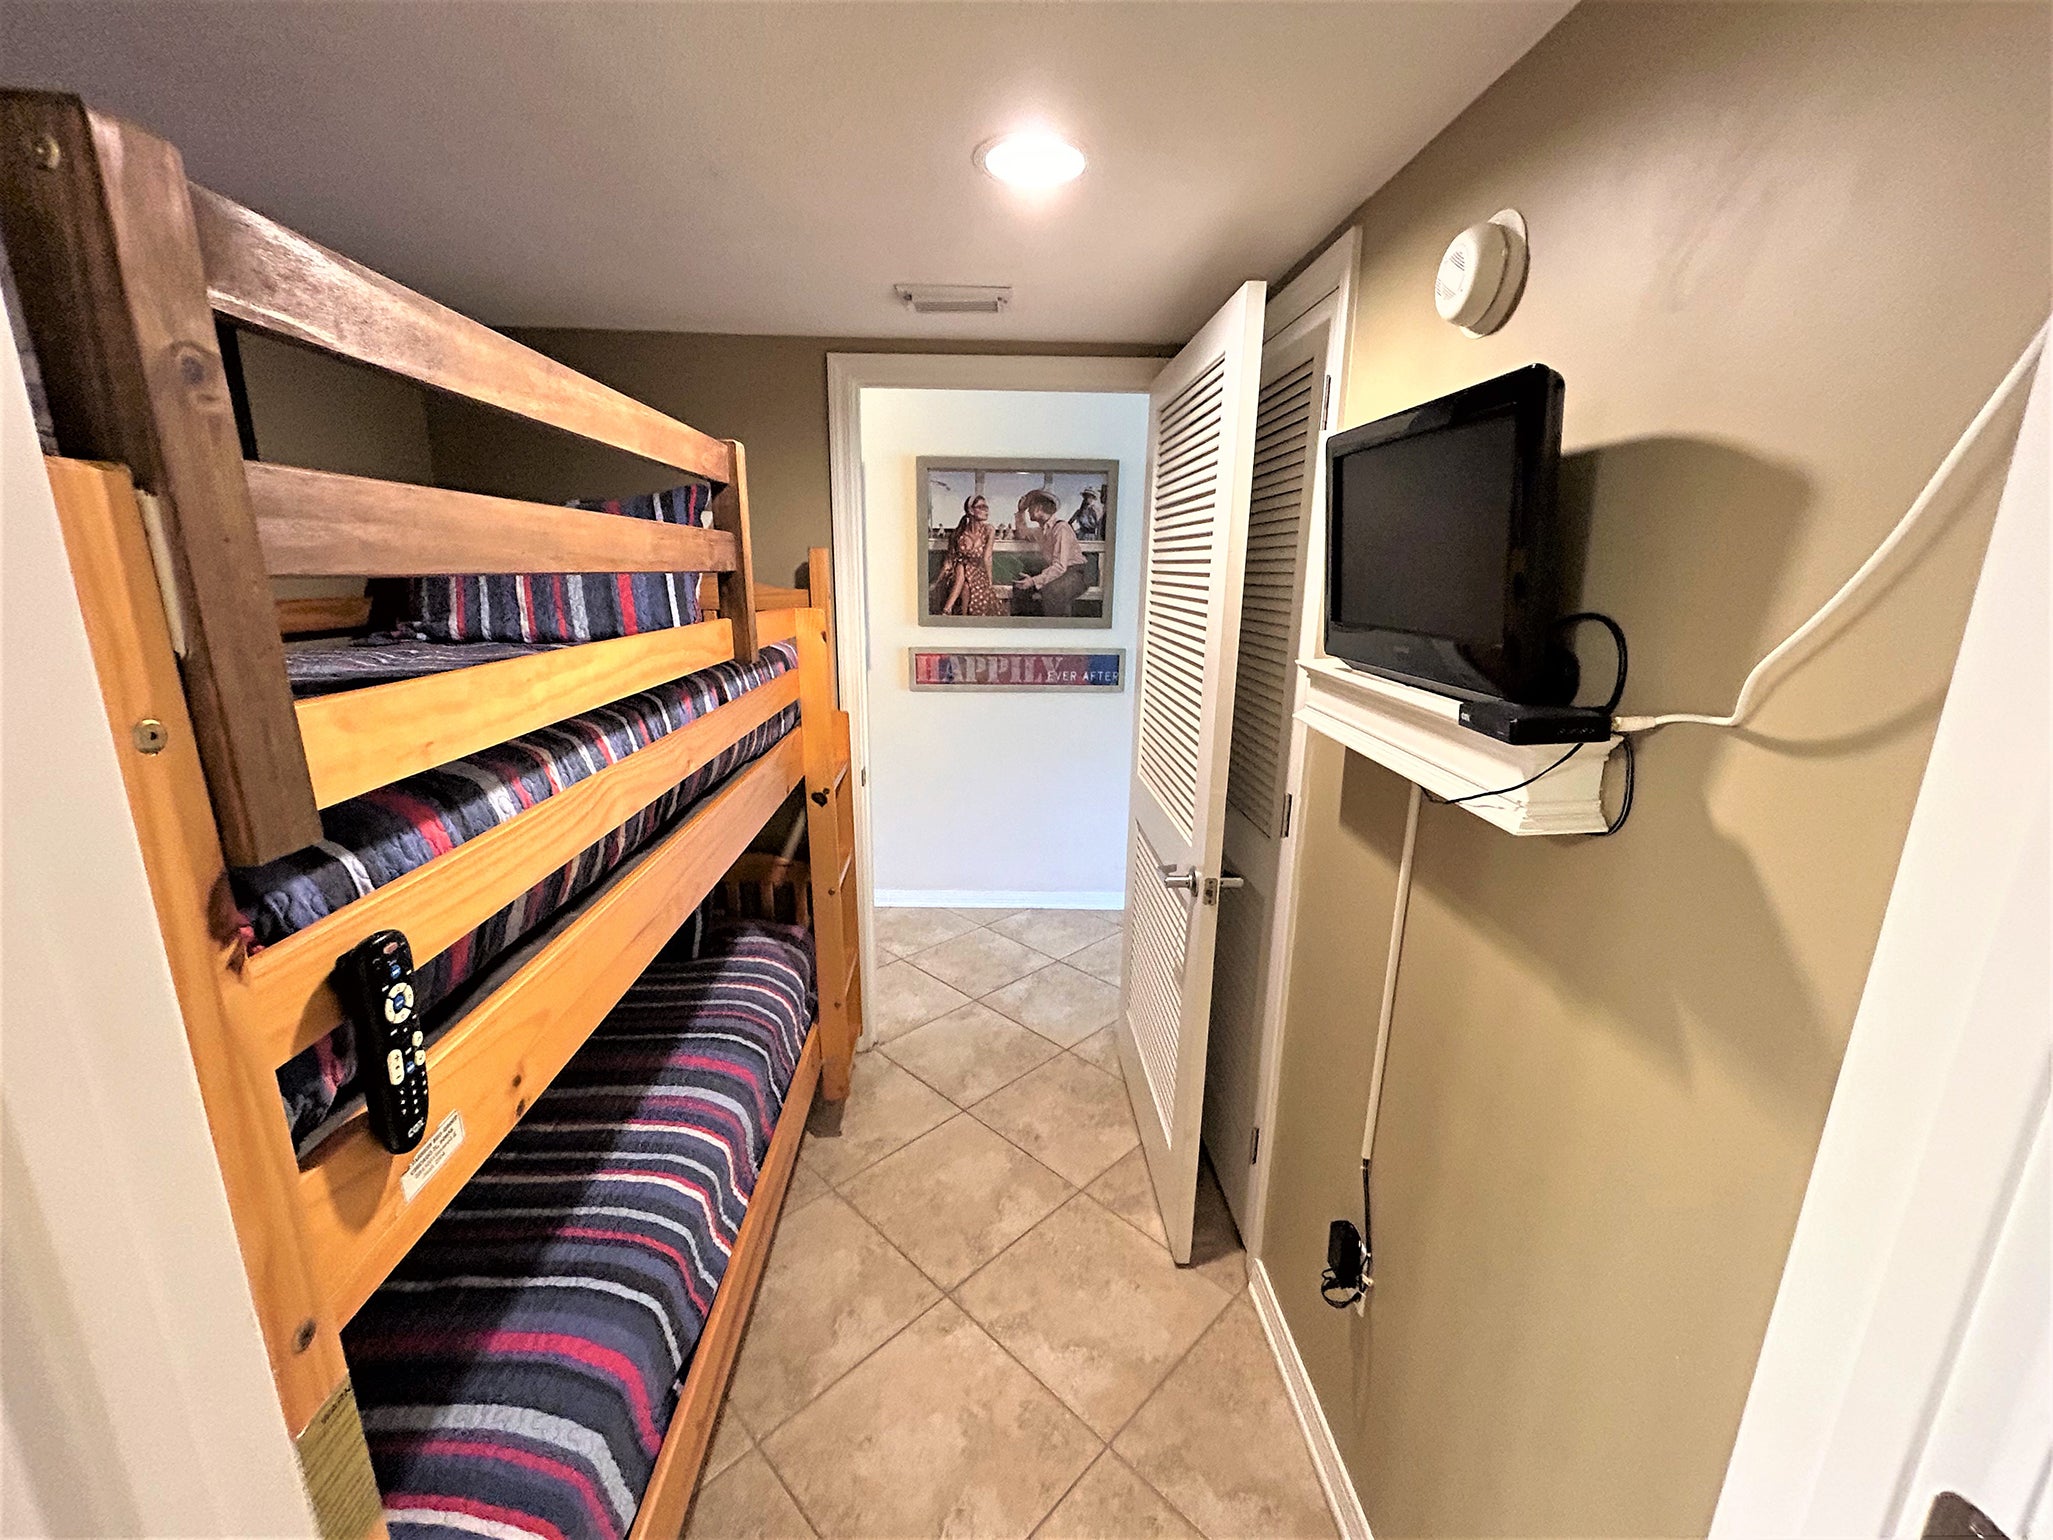 Bunk room with flat screen TV